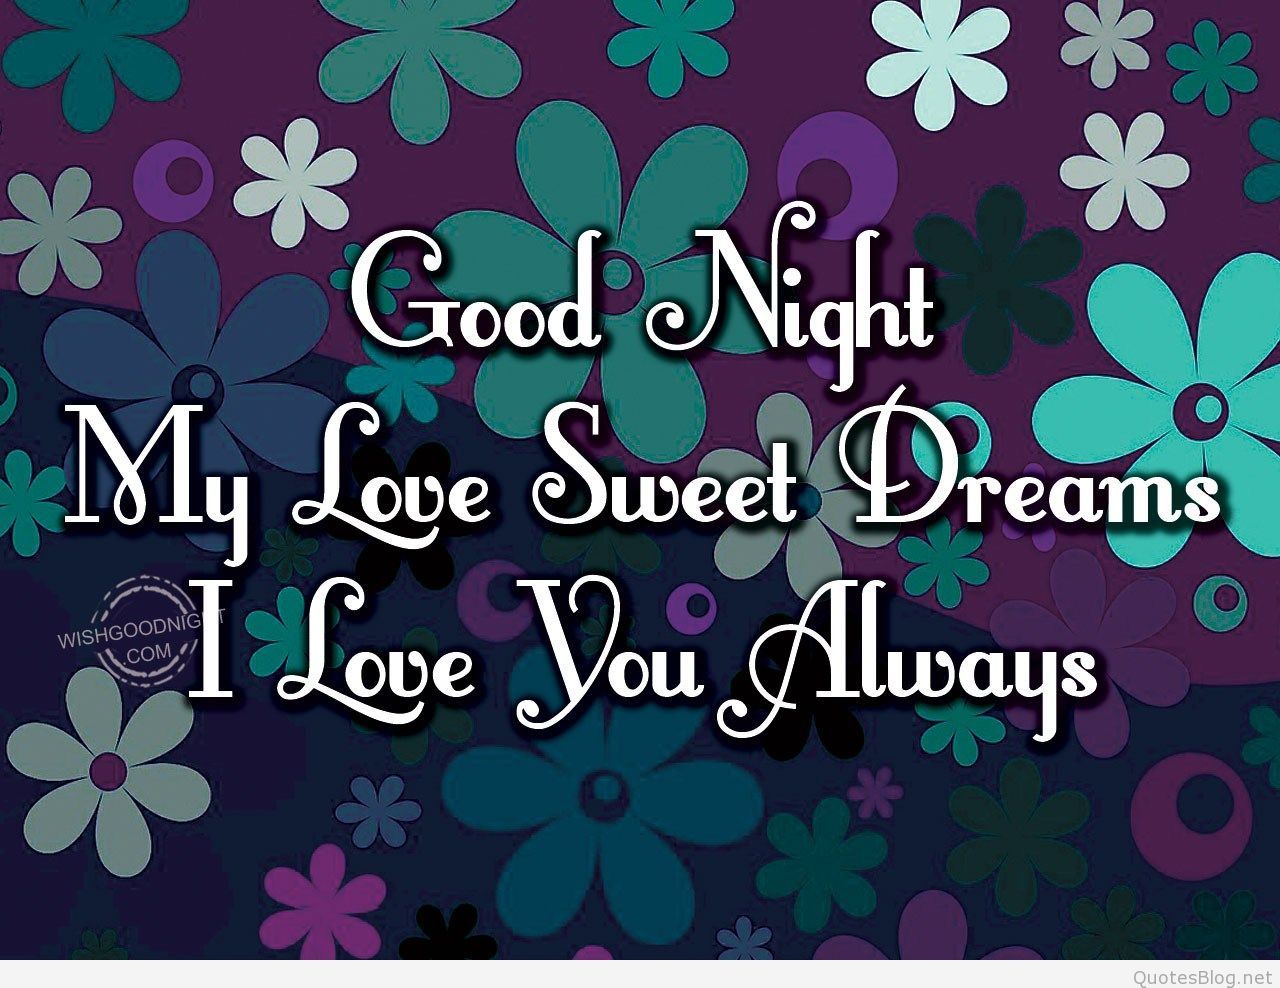 Good Night My Love Images Dp Status Messages And Good Night My Love Sweet Dreams 1280x9 Wallpaper Teahub Io